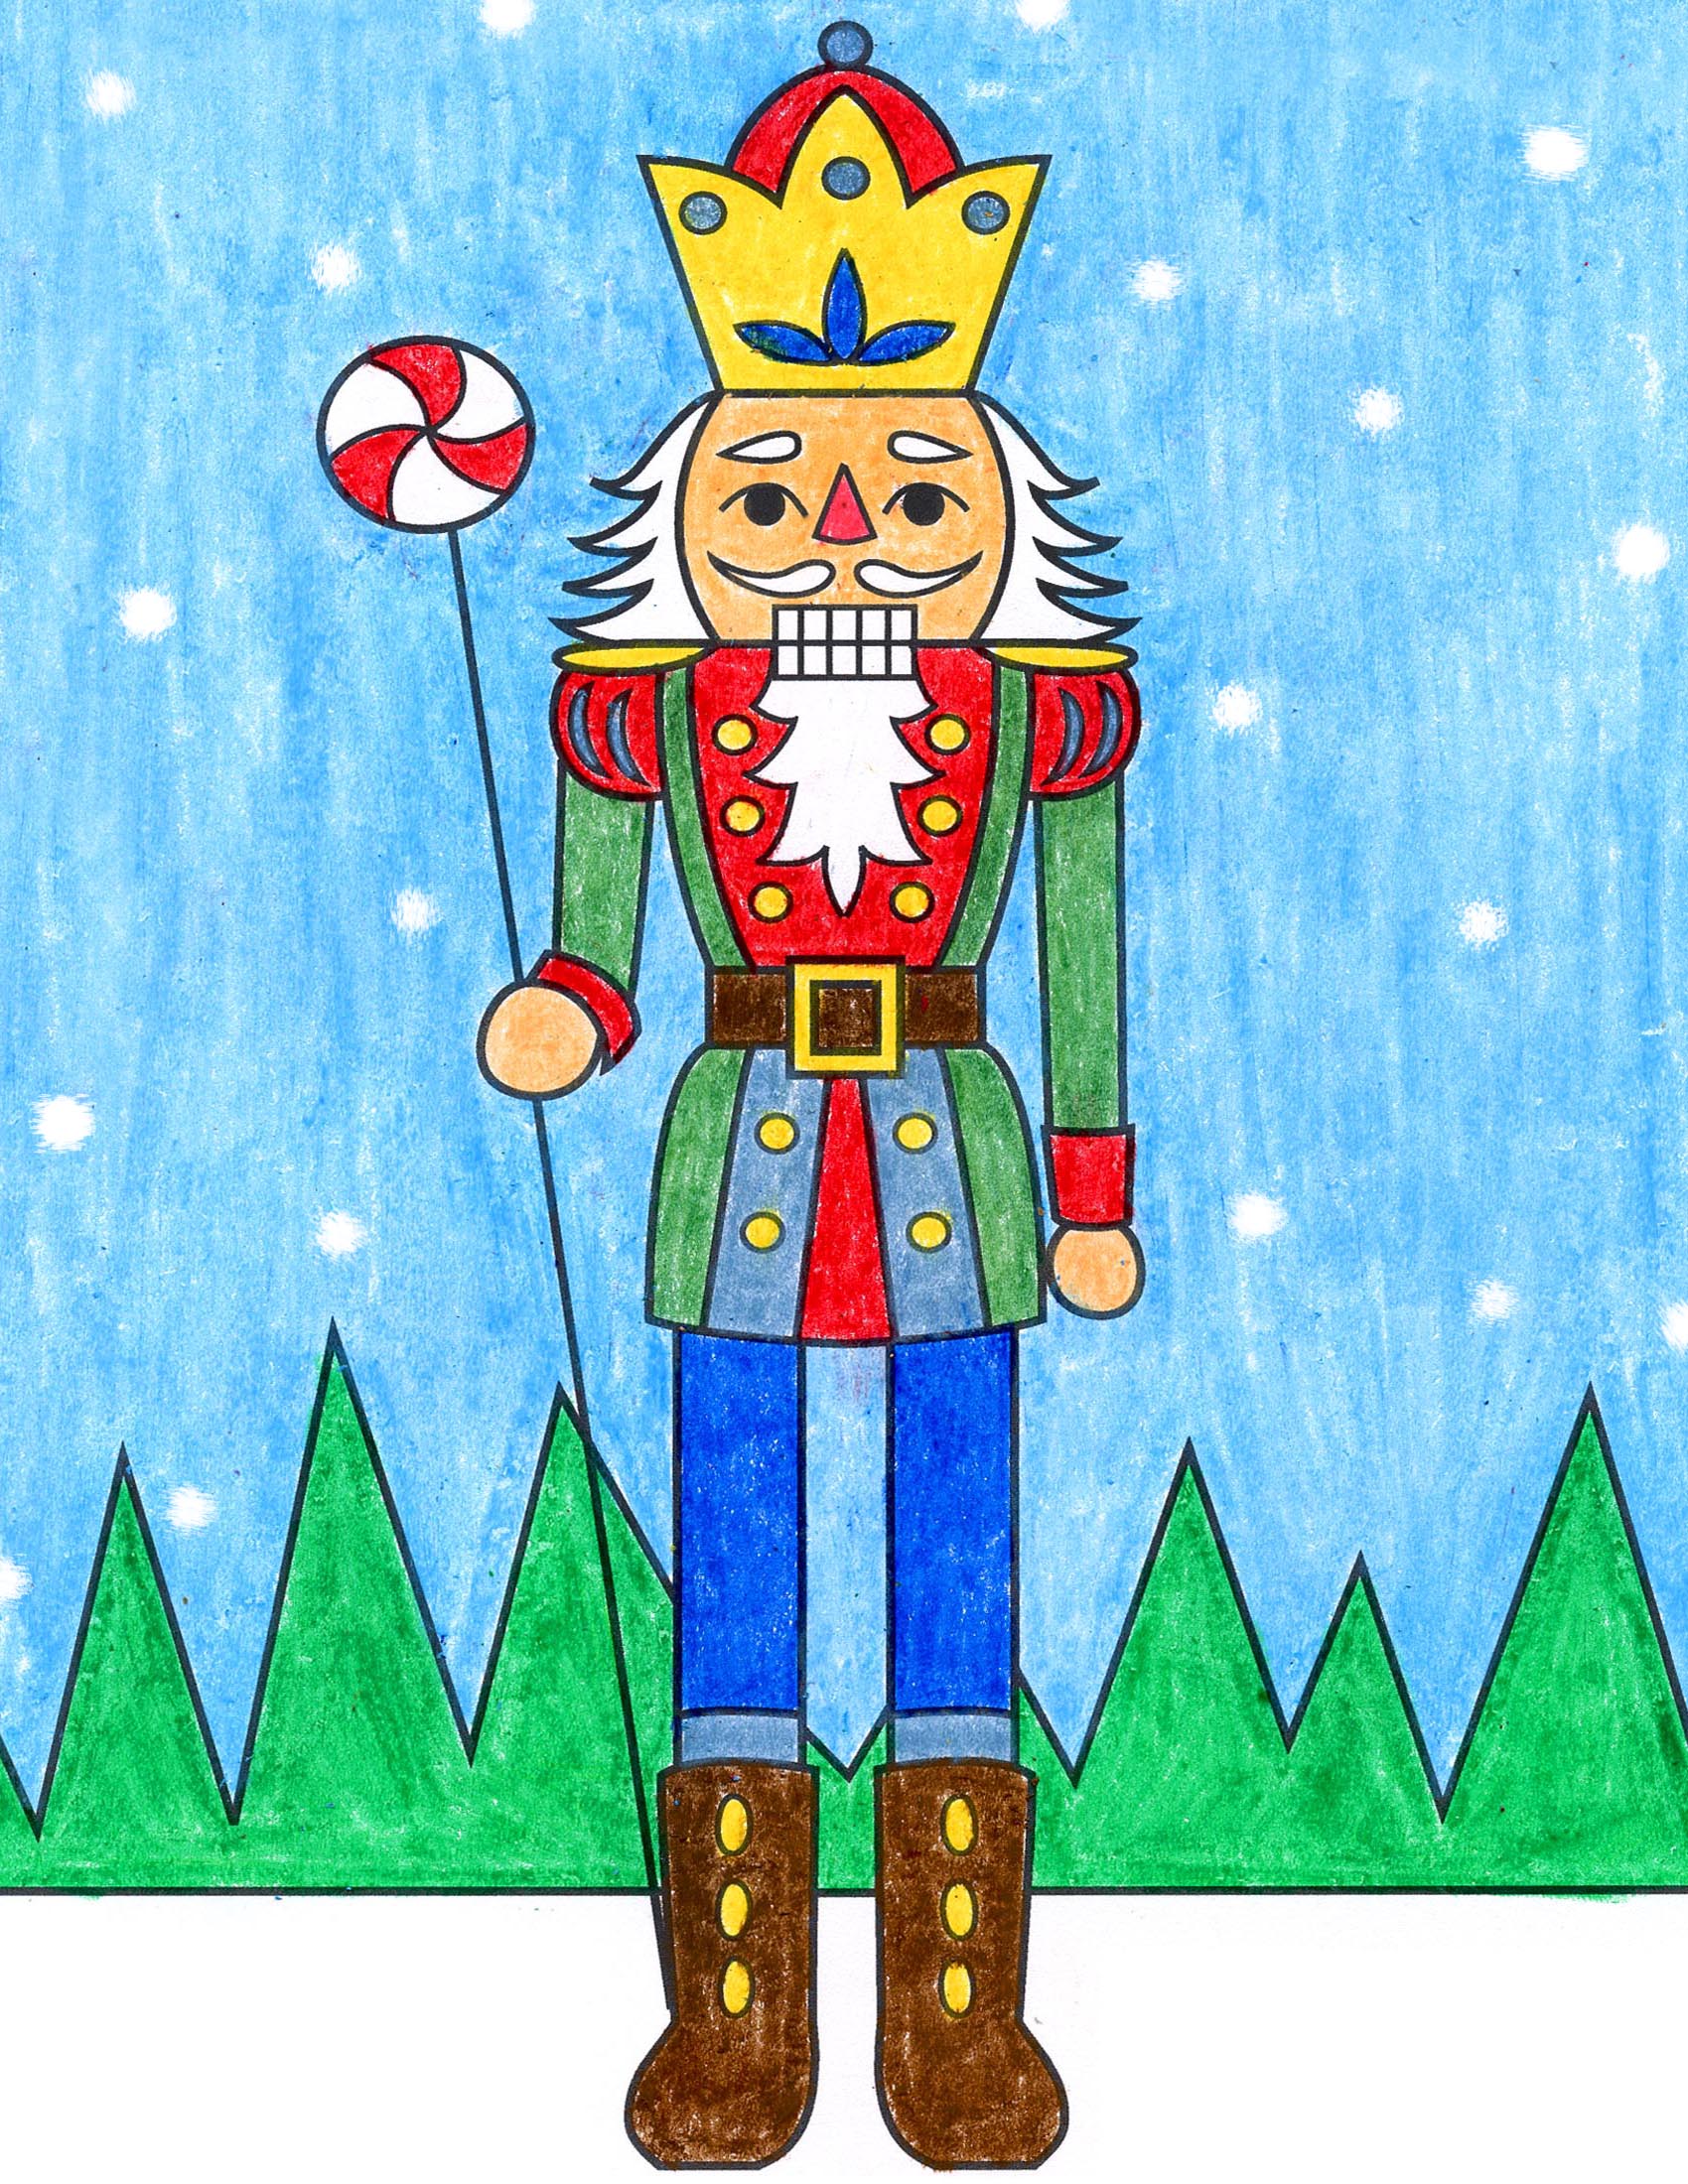 Easy How to Draw a Nutcracker Tutorial Video and Nutcracker Coloring Page